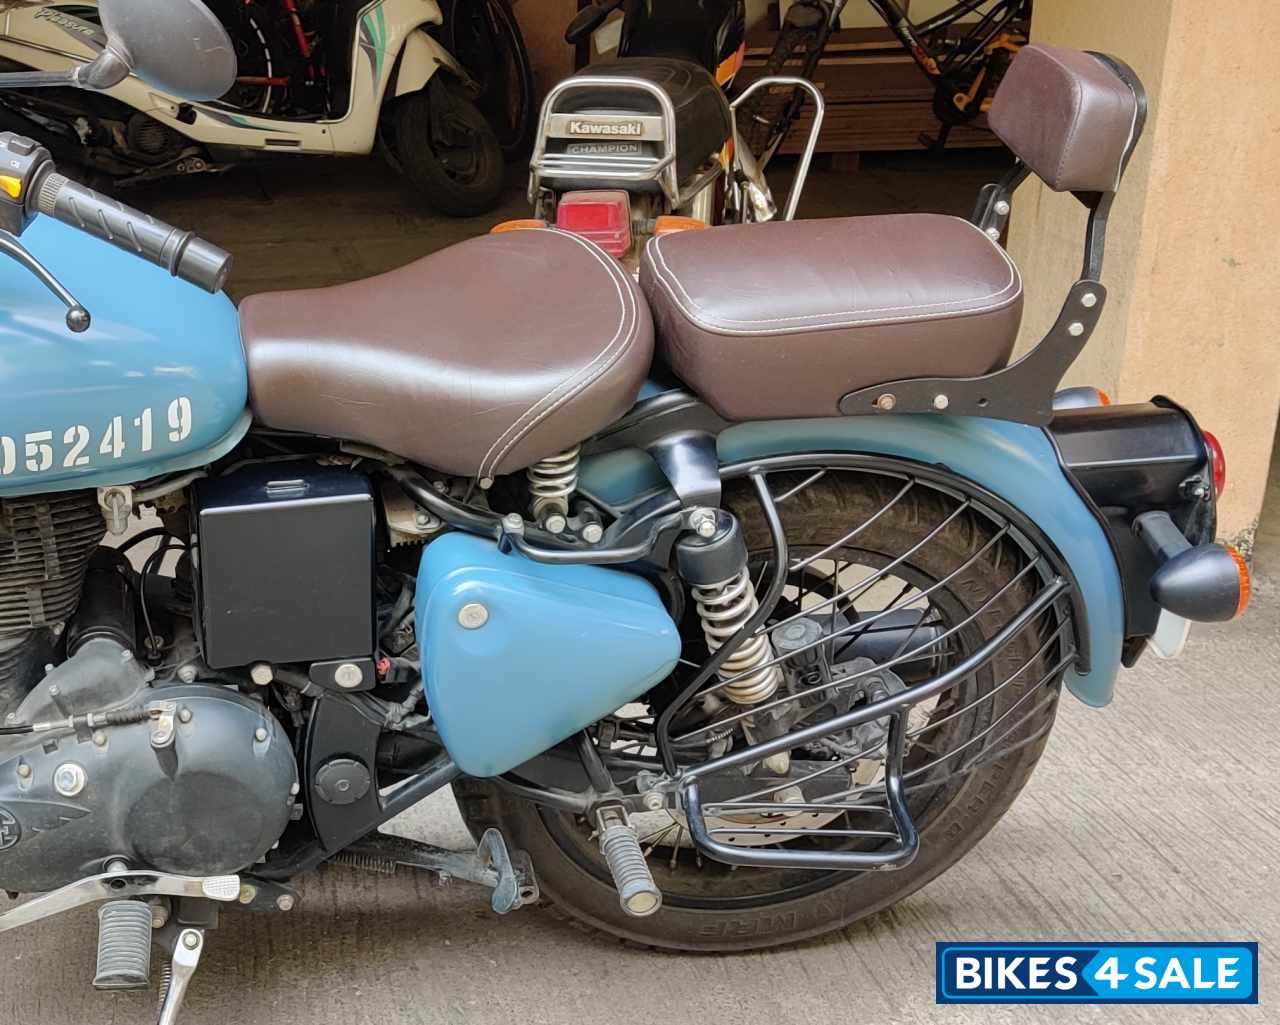 Royal Enfield Classic Signals Airborne Blue